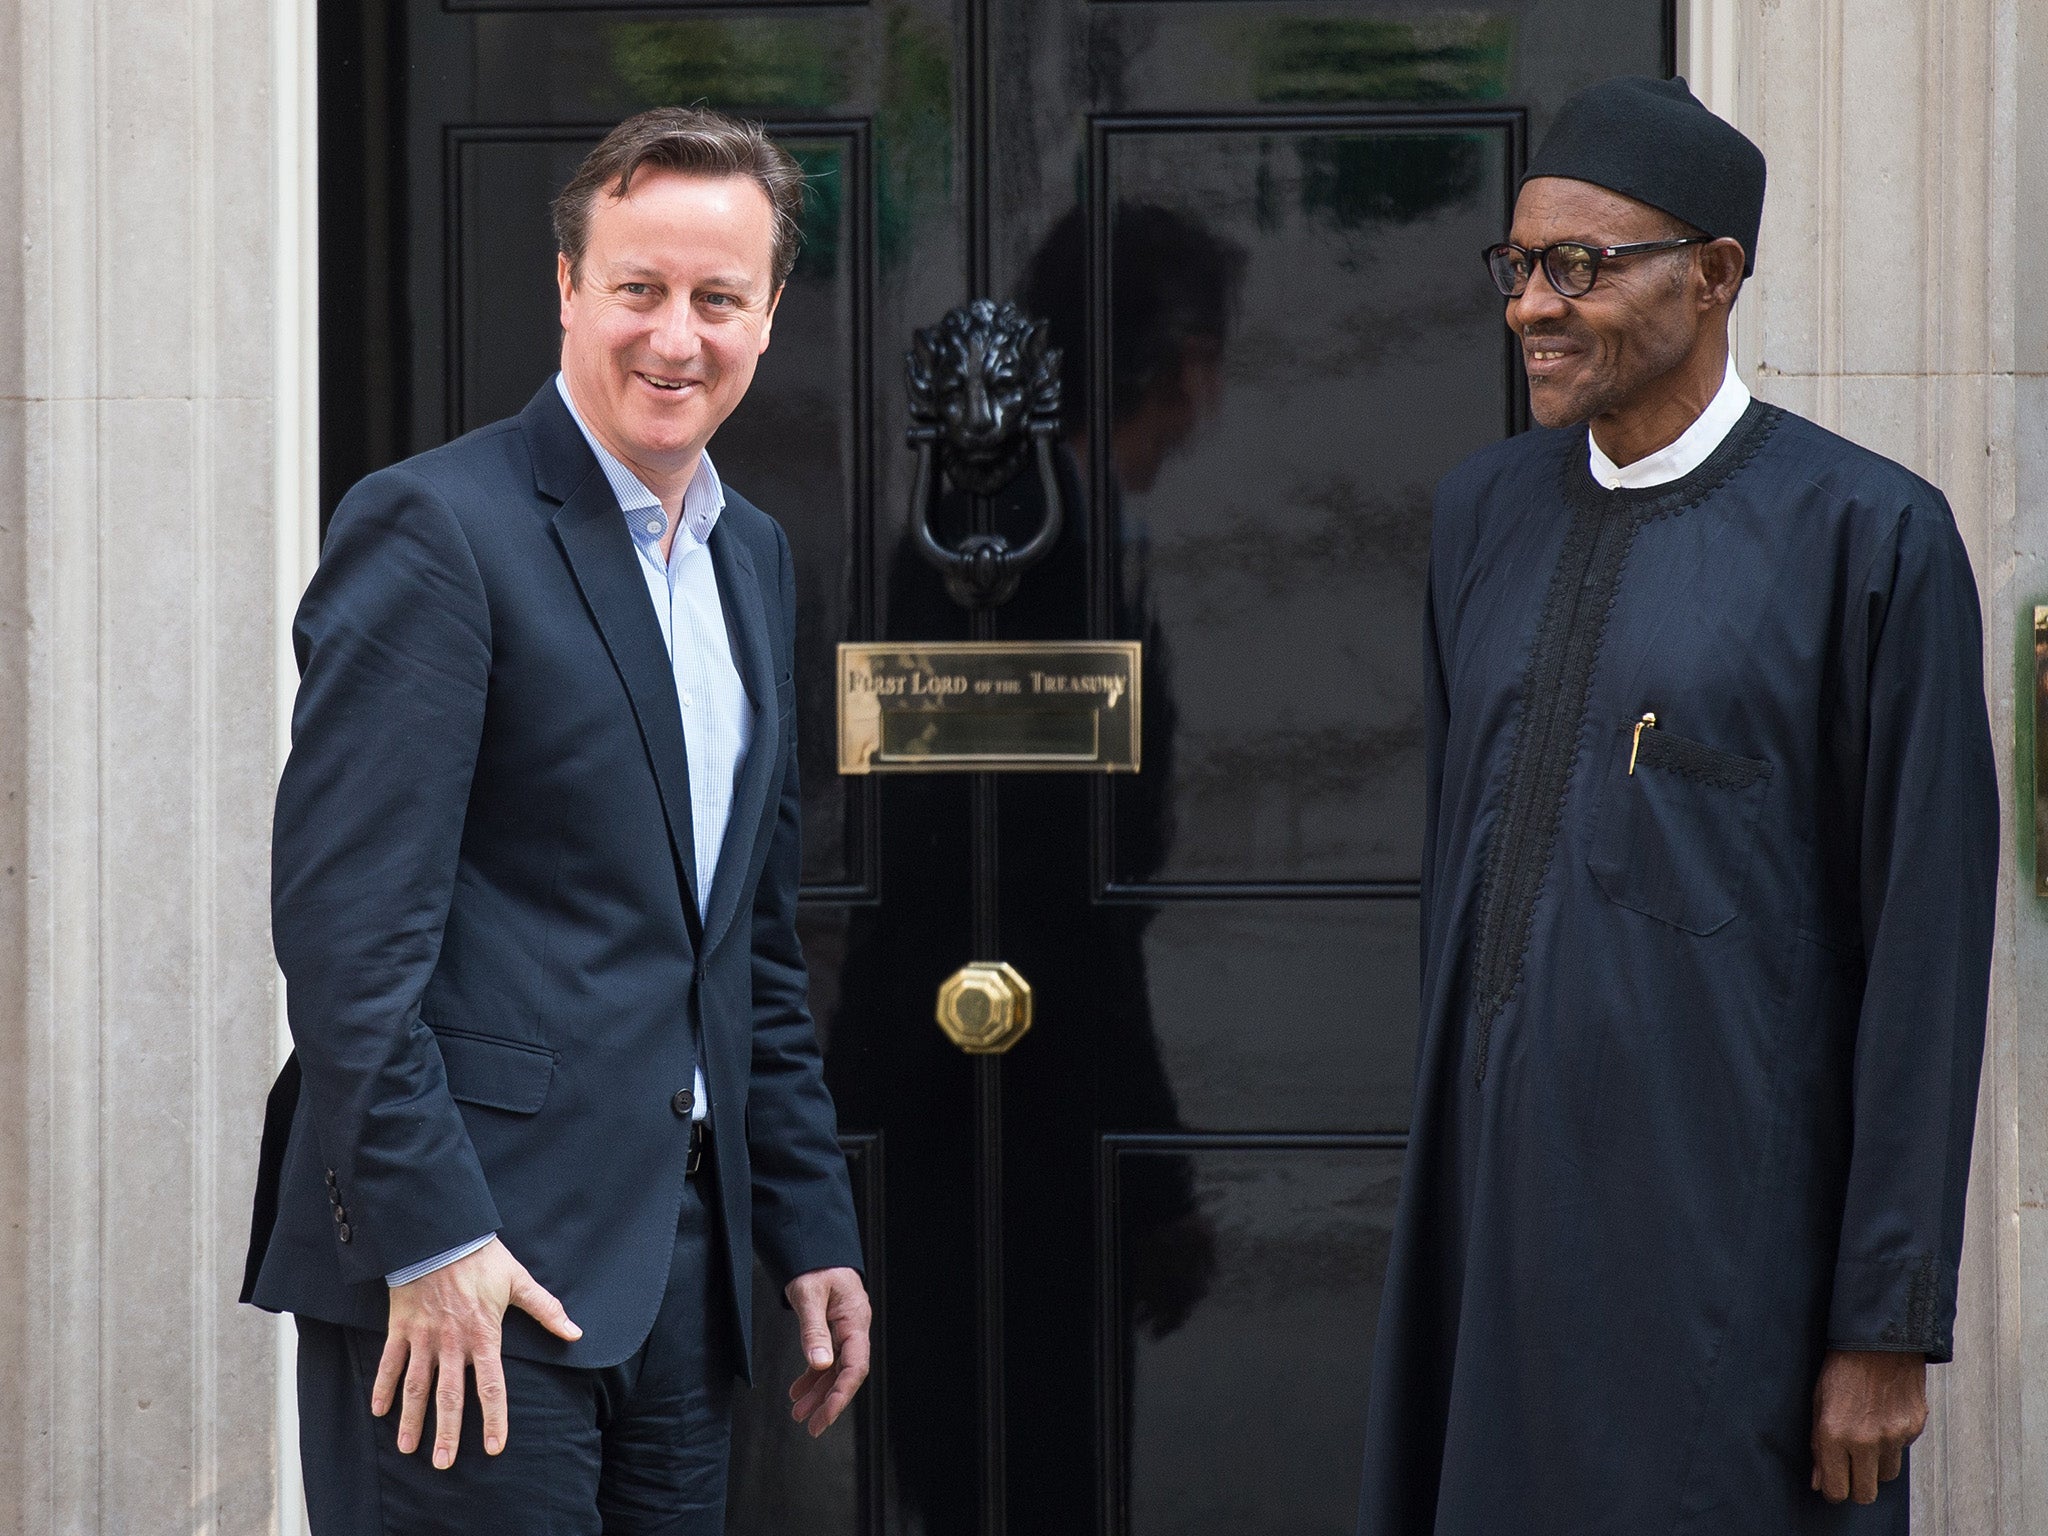 David Cameron with Muhammadu Buhari during a visit to the UK before his inauguration in 2015